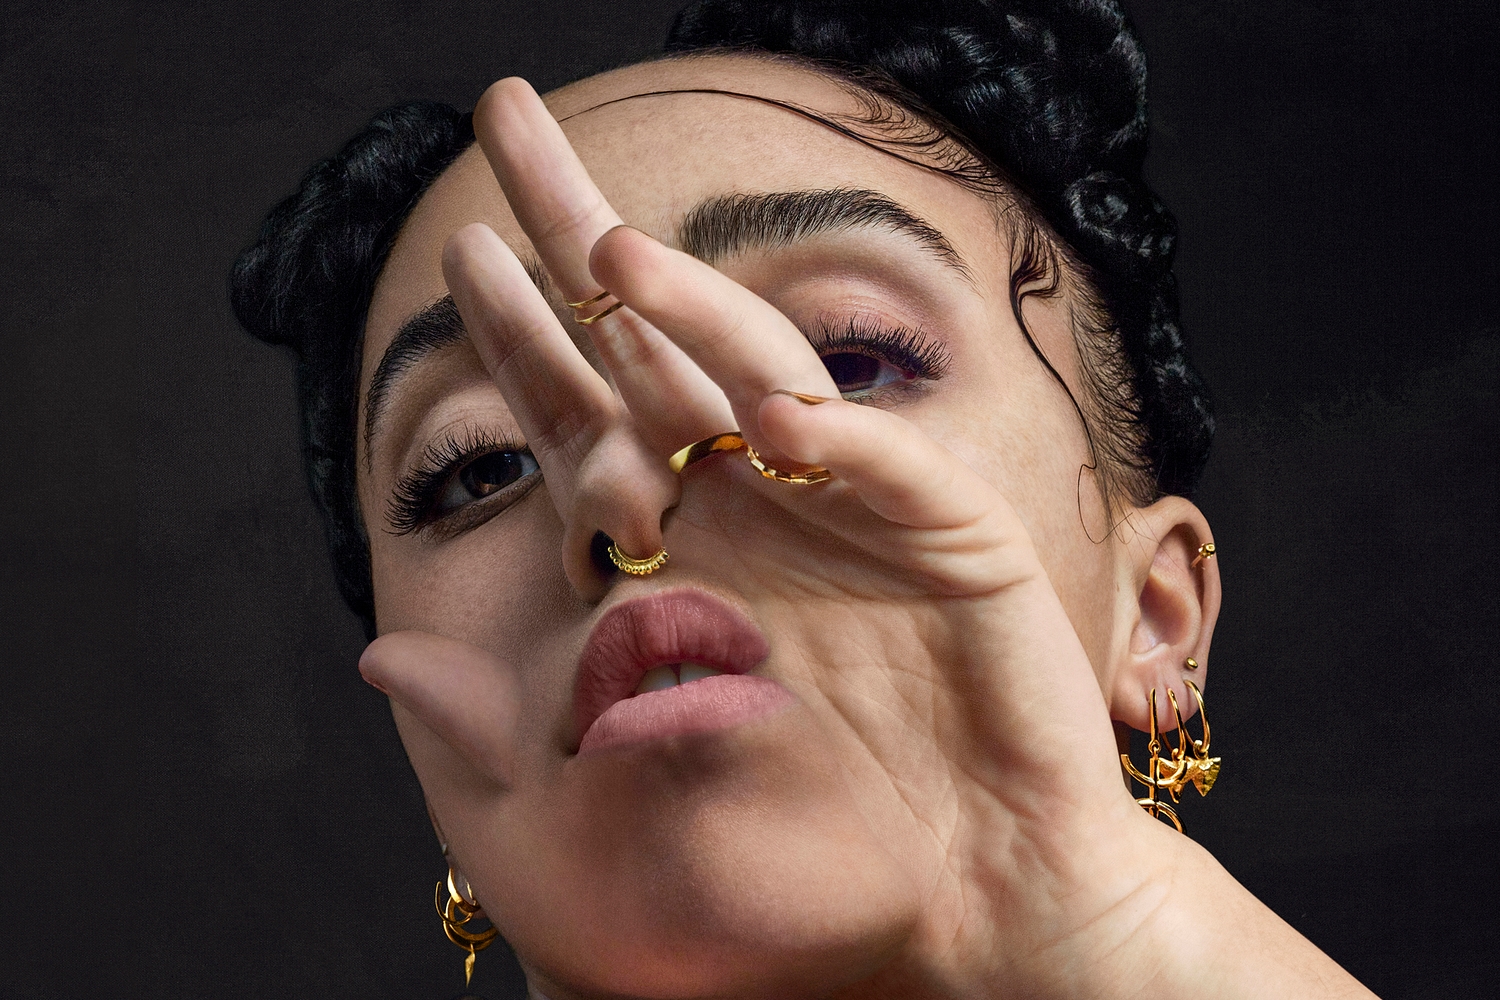 FKA twigs shares a sneaky peek at her new immersive Halloween-themed exhibit ‘Rooms’